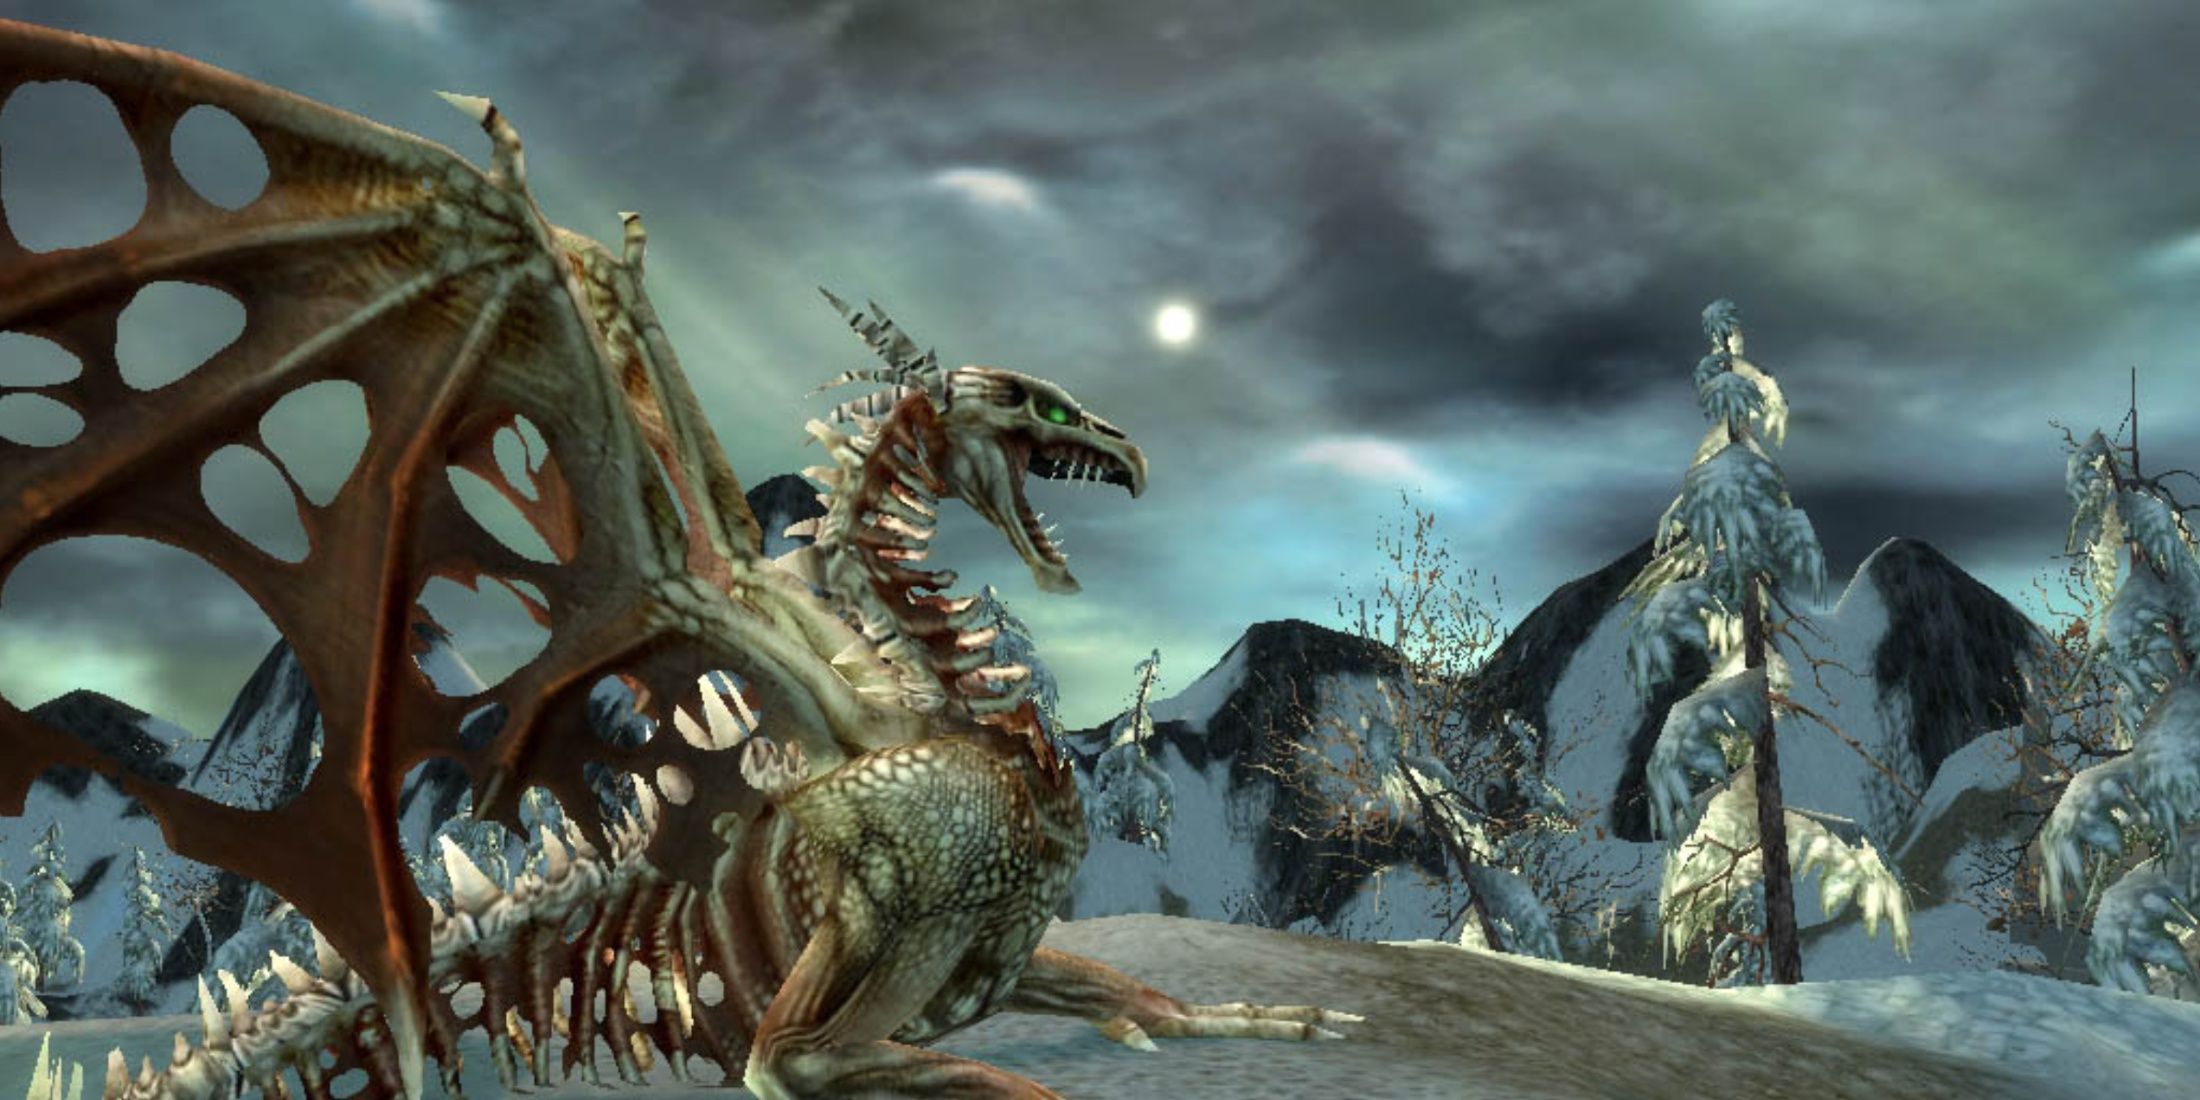 Guild Wars Introduced Instanced Content To MMORPG